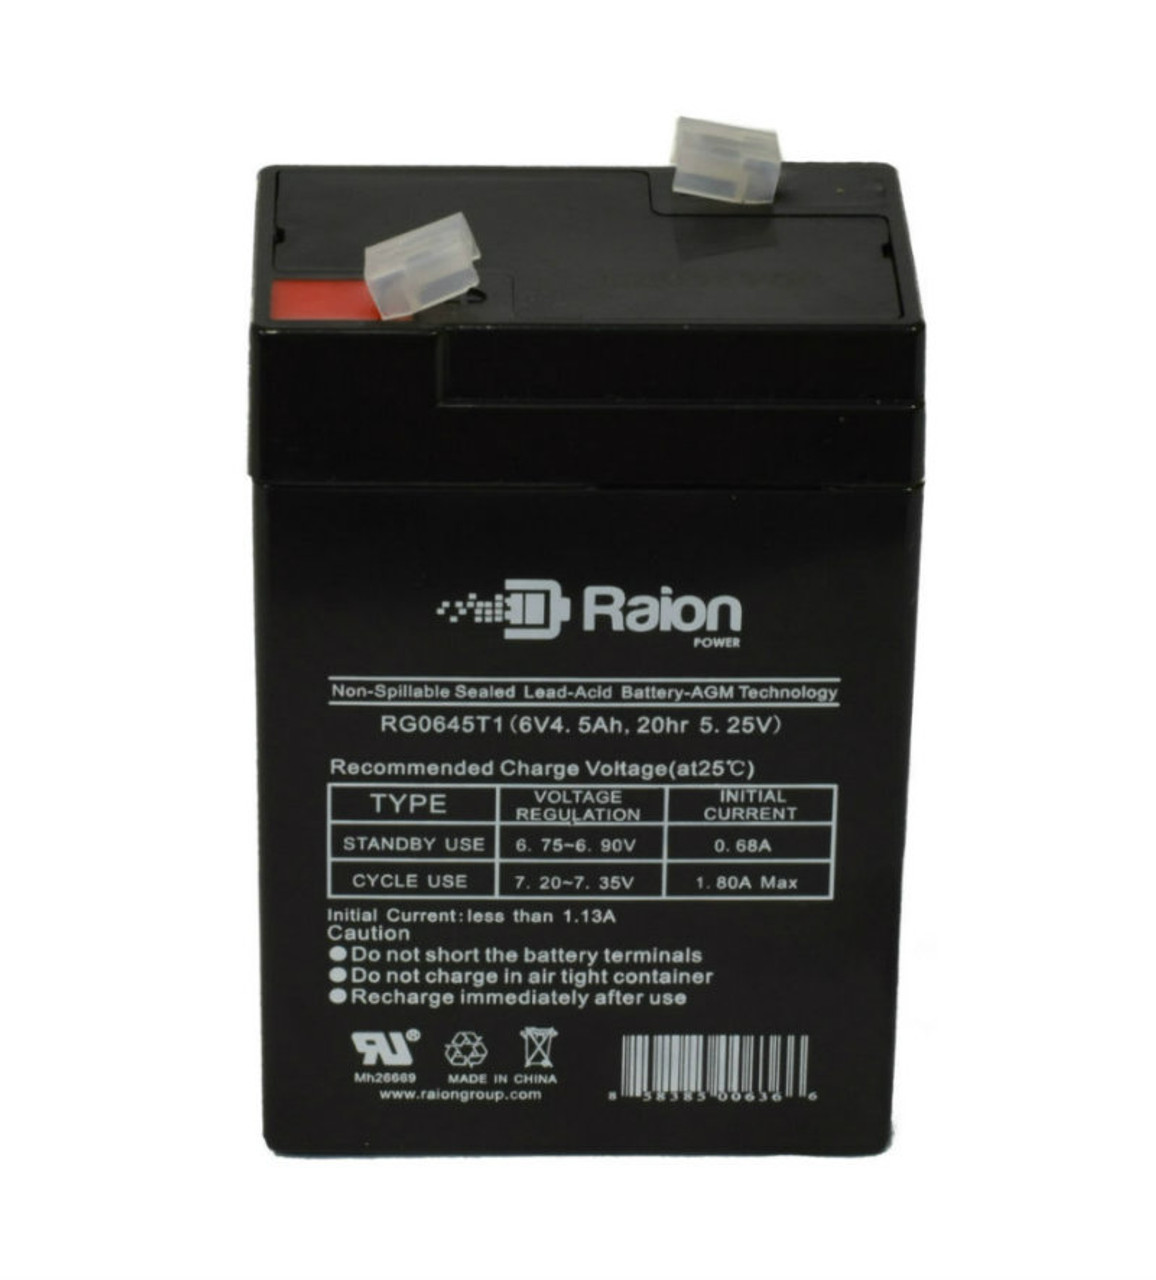 Raion Power RG0645T1 Replacement Battery Cartridge for Weiboer GB6-6